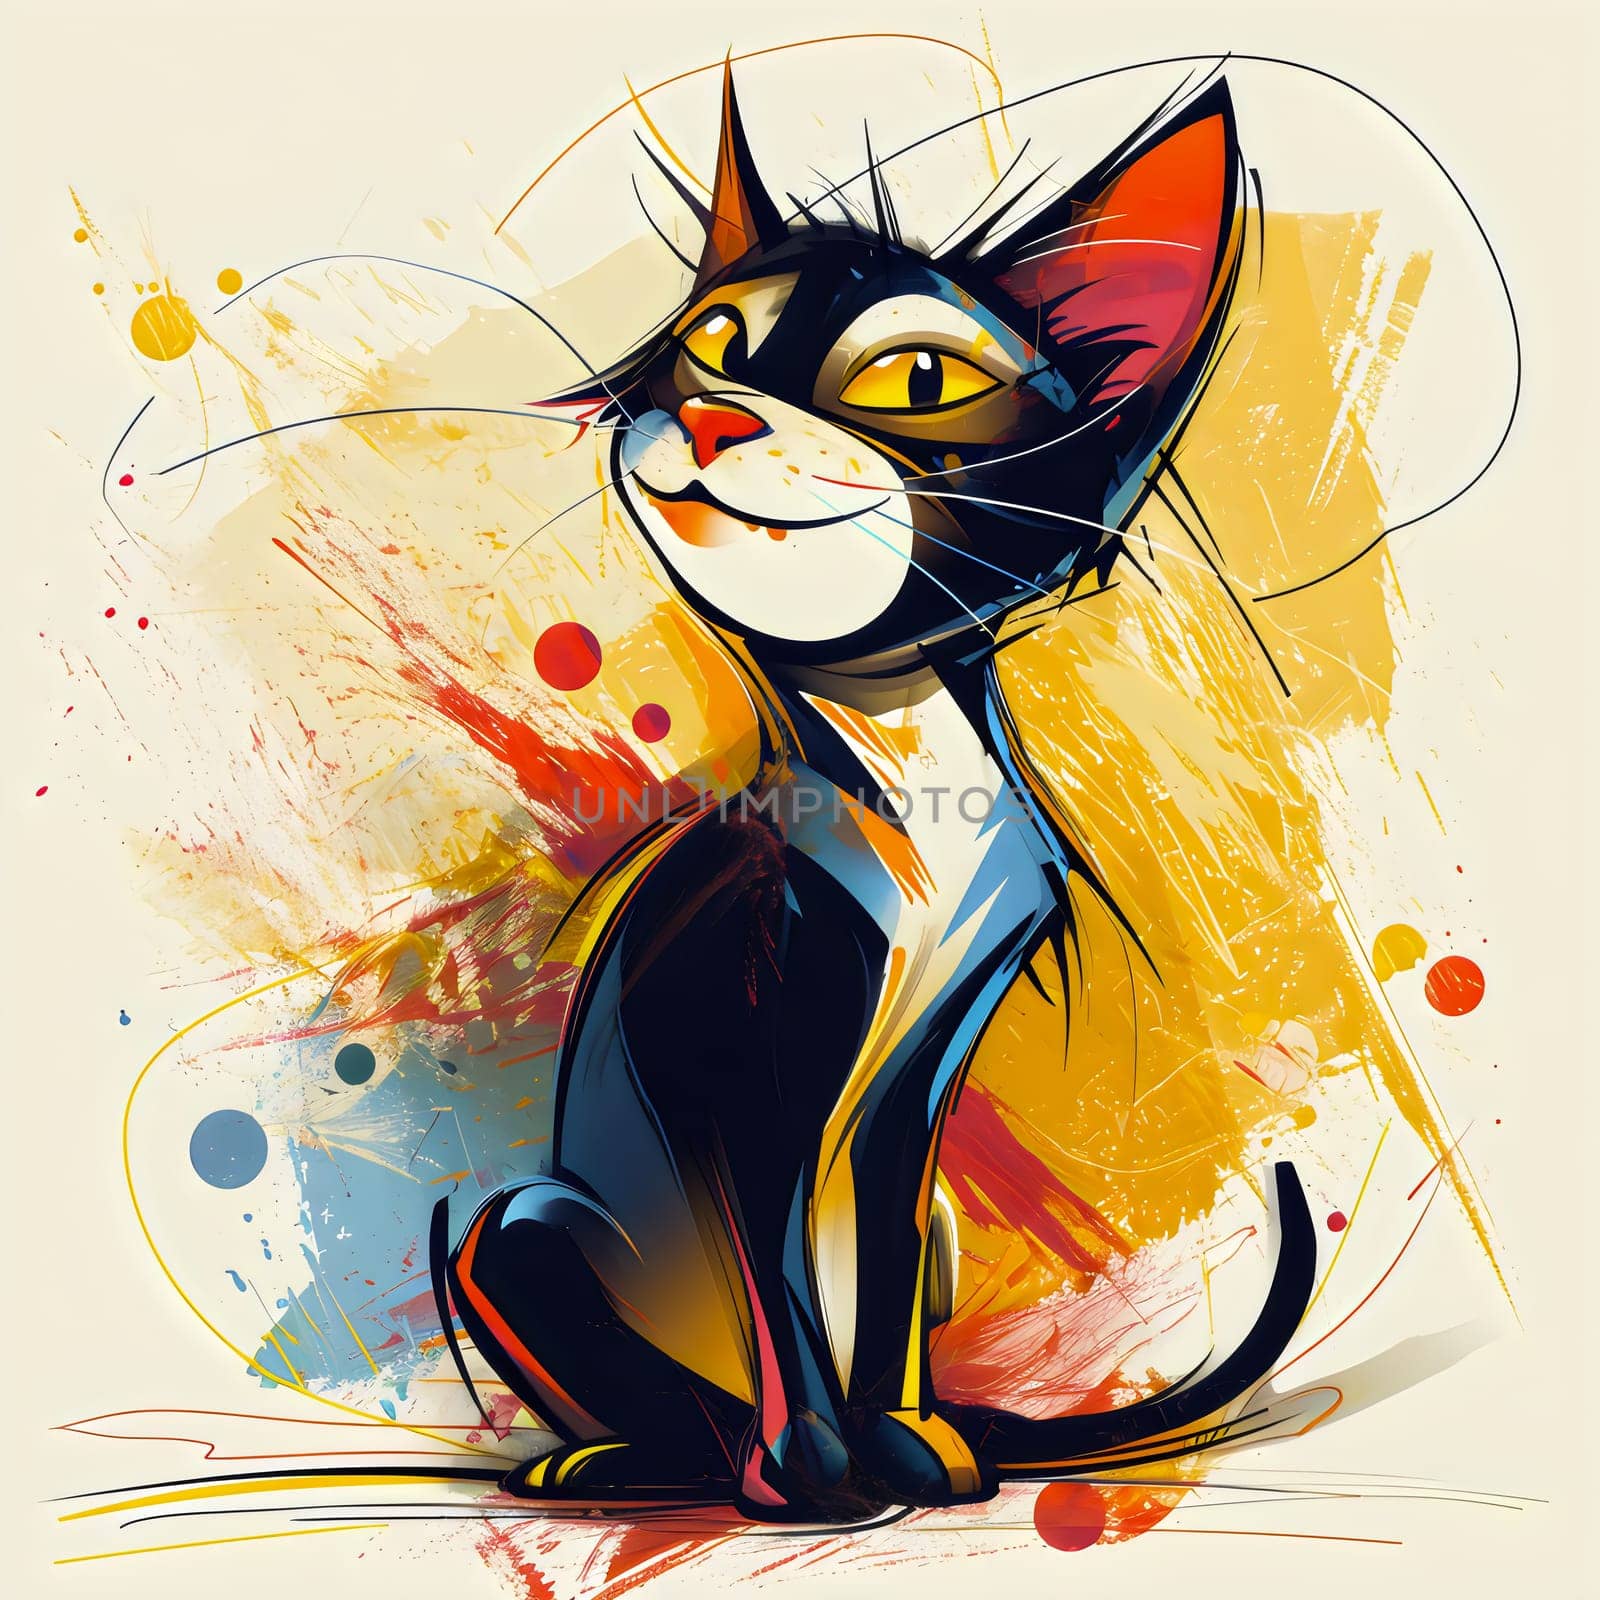 A vibrant and playful cat illustration art with bold abstract splashes by chrisroll